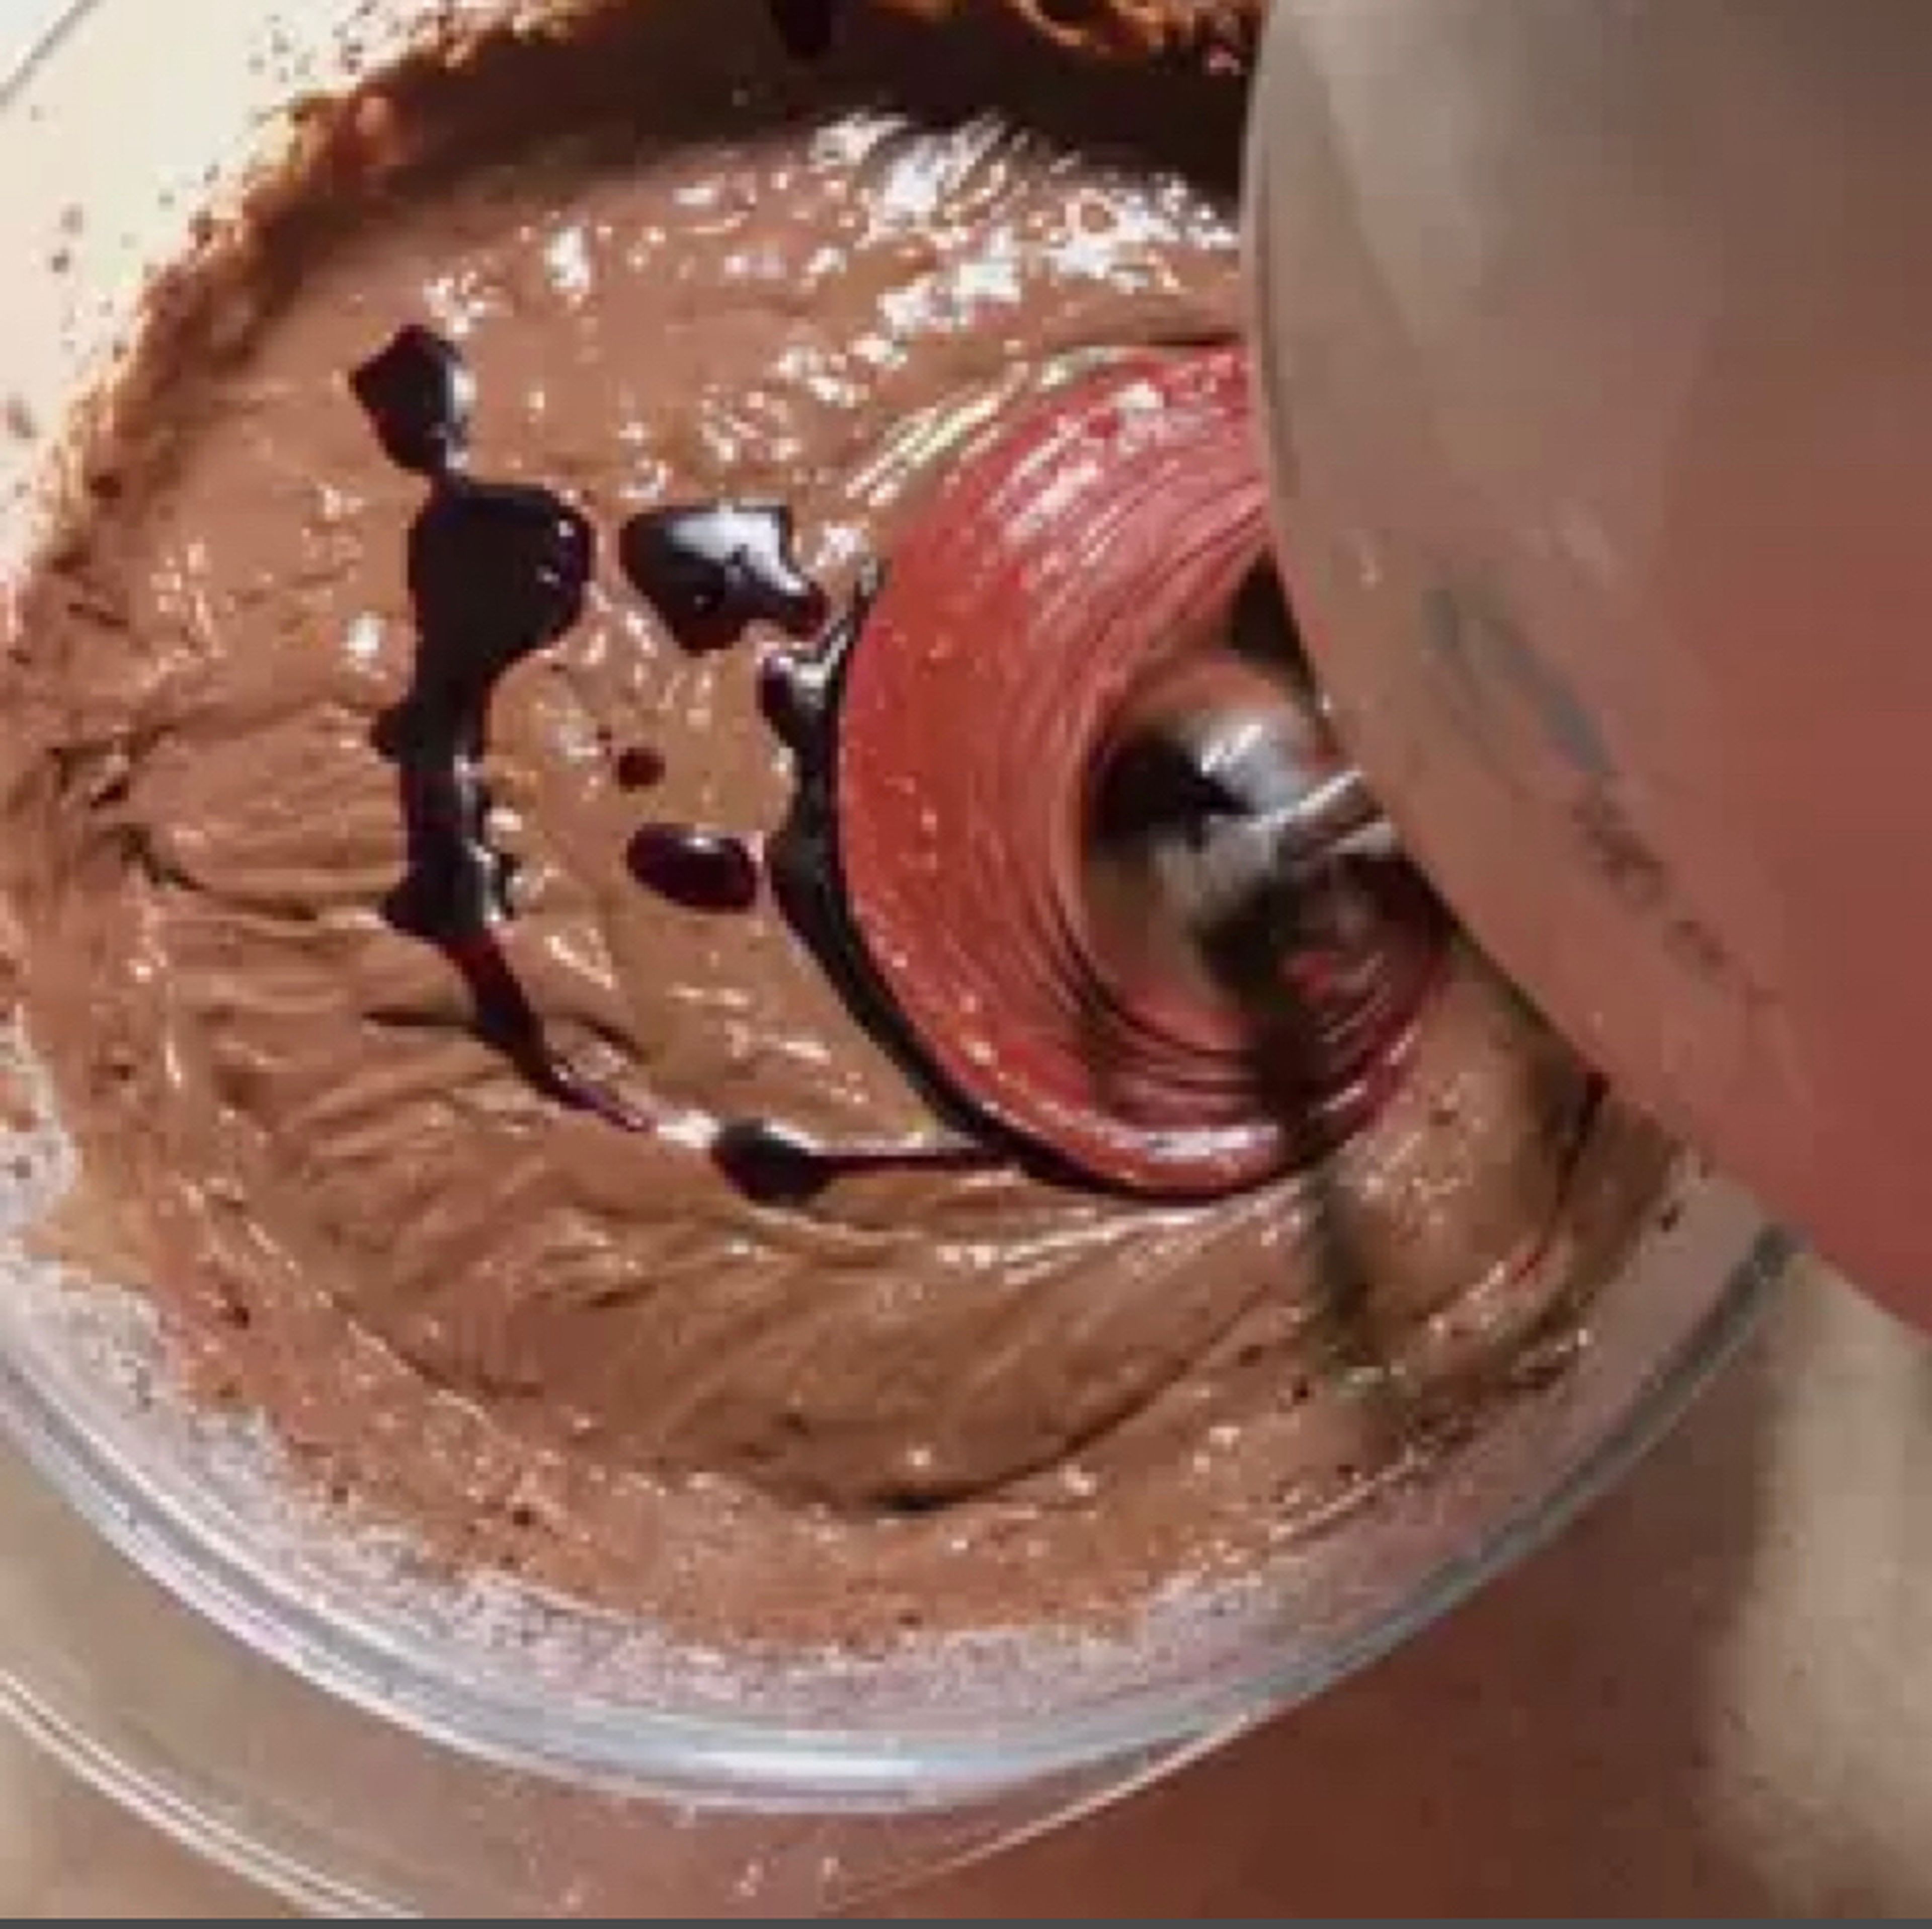 Then mix flour, cocoa, baking powder, baking soda and salt and add to the mixture . Add red color.